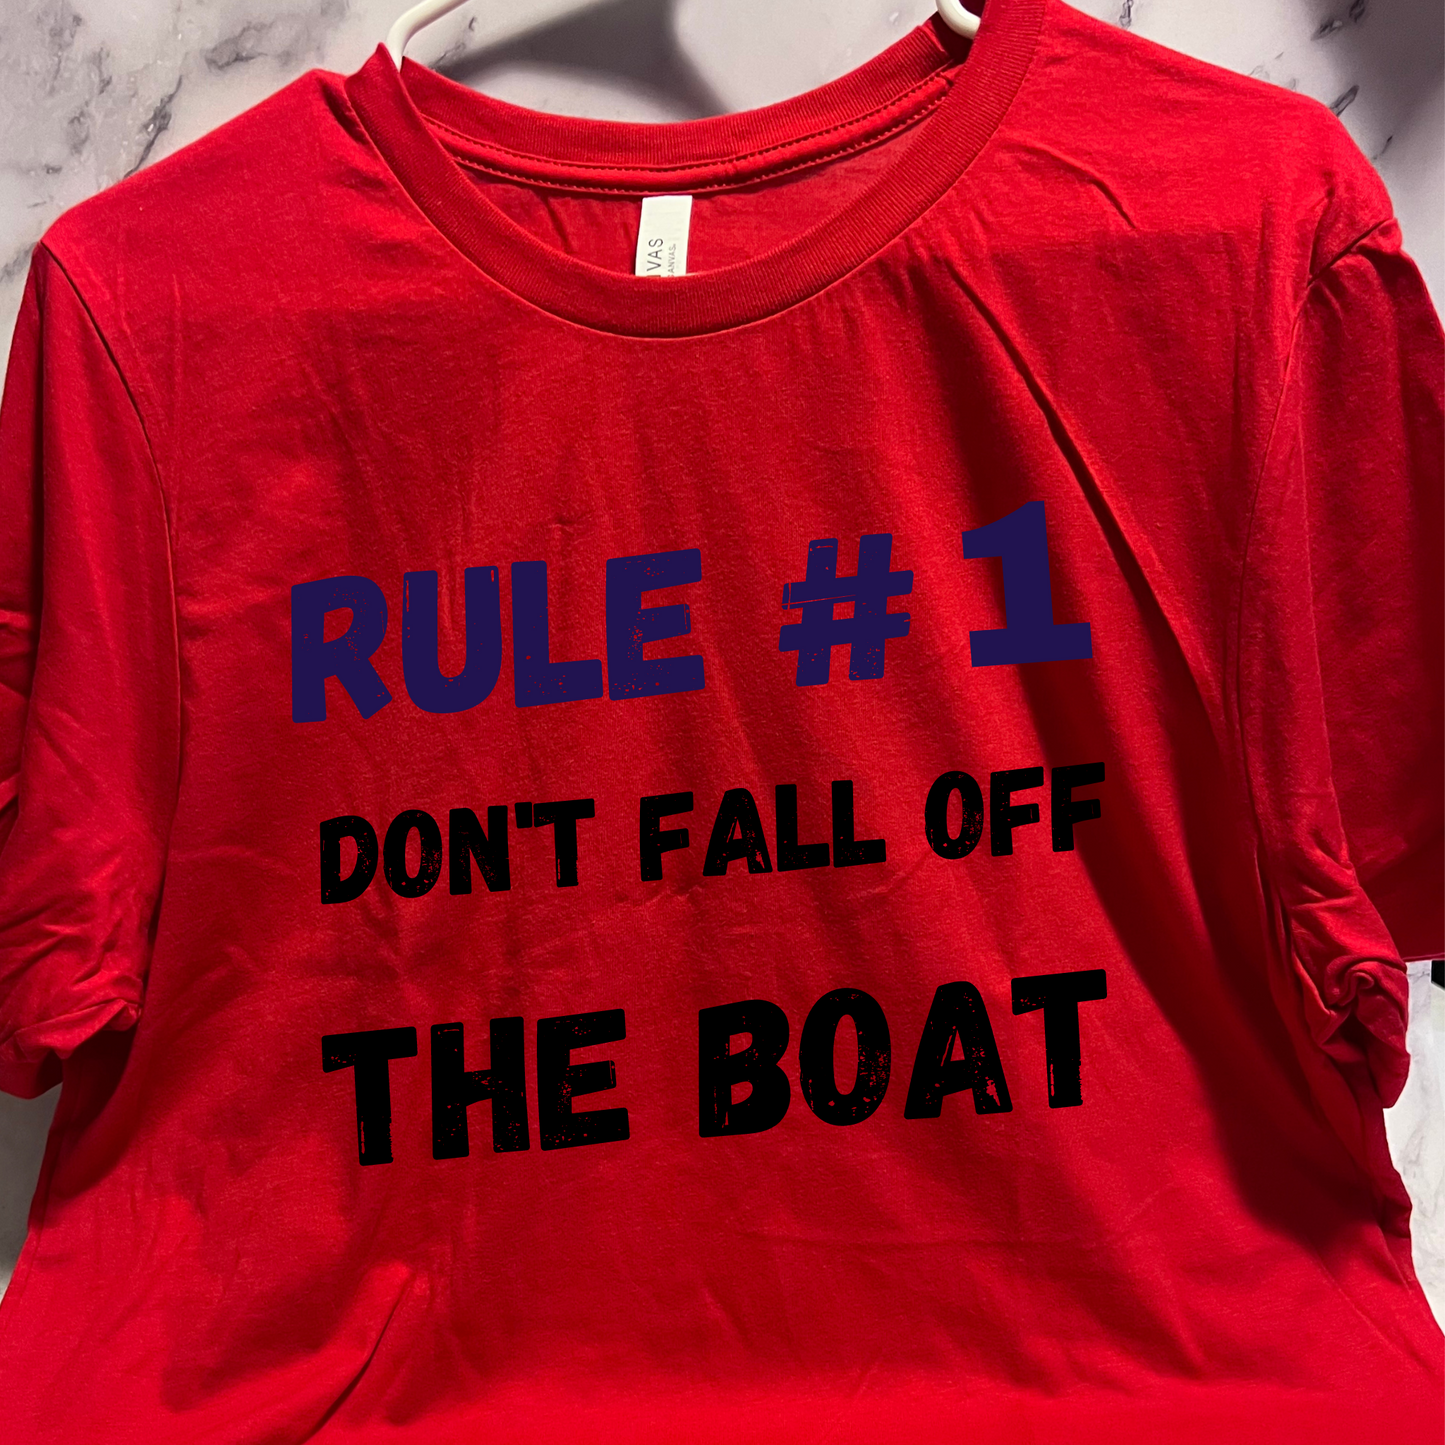 Rule #1 don't fall off the boat, Funny boat shirt, short sleeve unisex t-shirt, for men or women